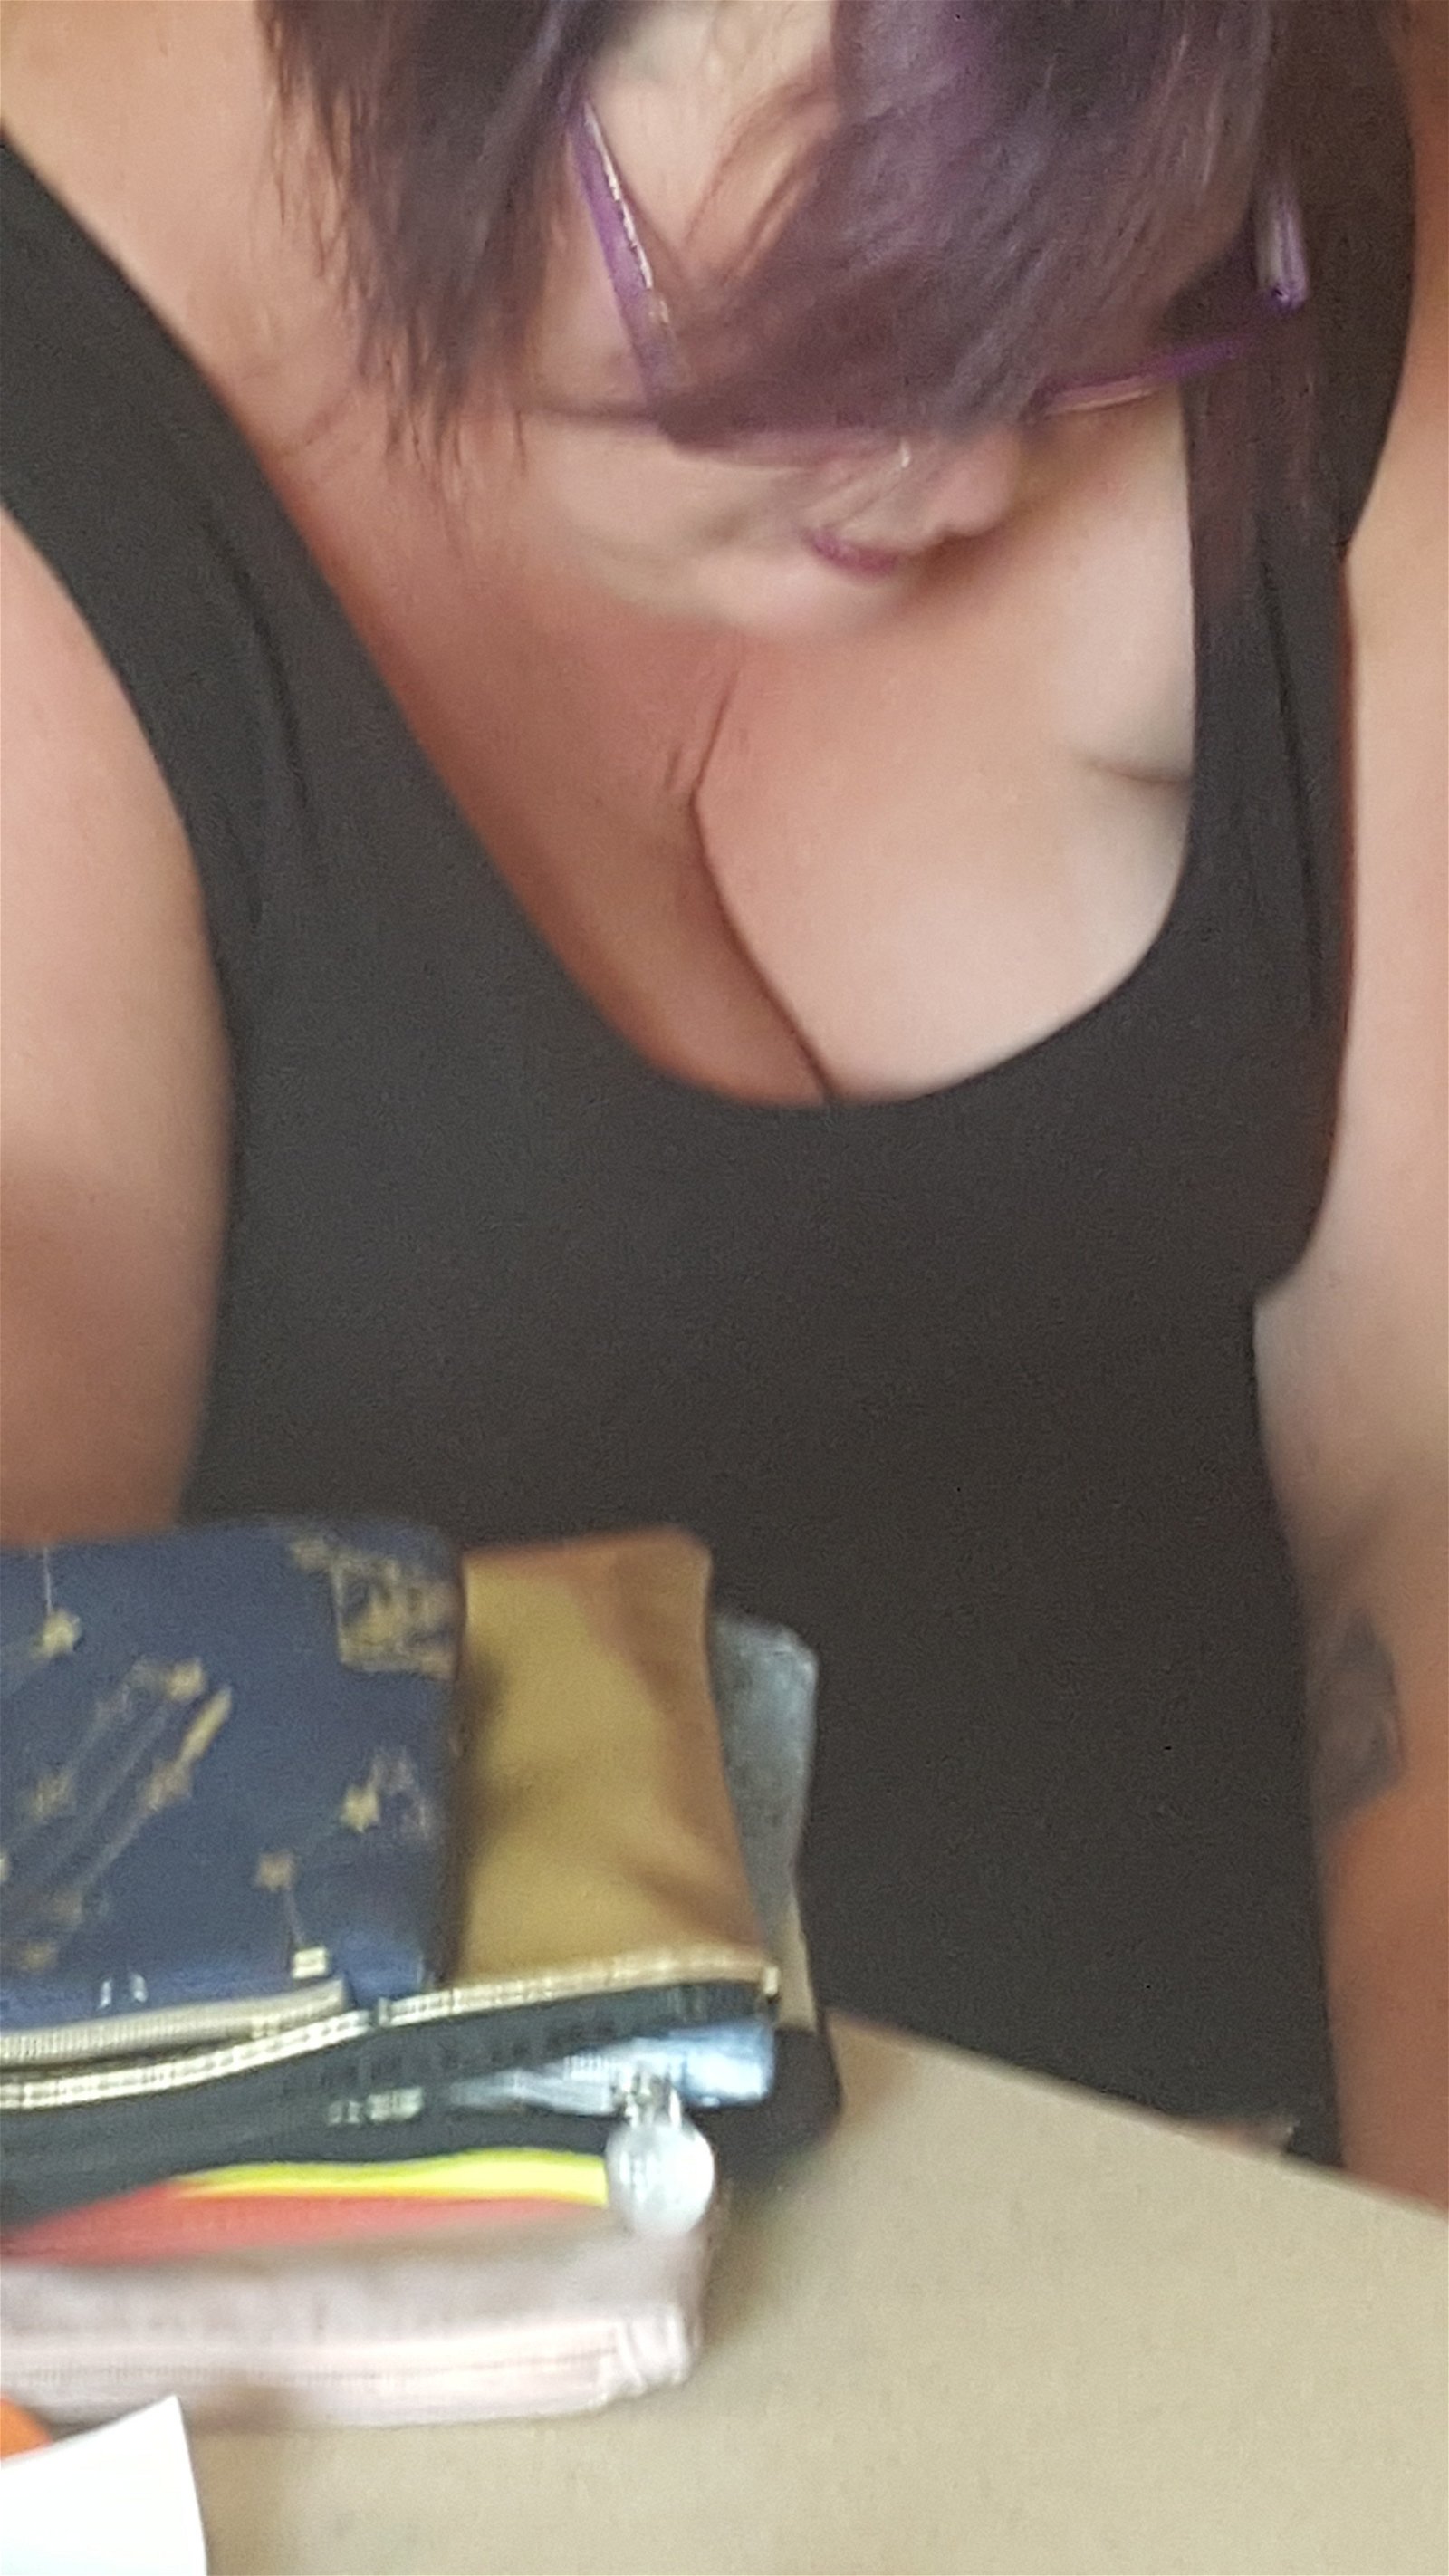 Photo by Dawn42D with the username @Dawn42D,  July 27, 2017 at 3:58 PM and the text says 'So sexy dressed for work #wife  #bbw  #wife  #sexy  #wife  #big  #naturals  #big  #tits  #cleavage  #dressed  #hot  #for  #work  #downblouse  #unaware  #wife  #WVHotBBW  #wvhb  #Dawn42D'